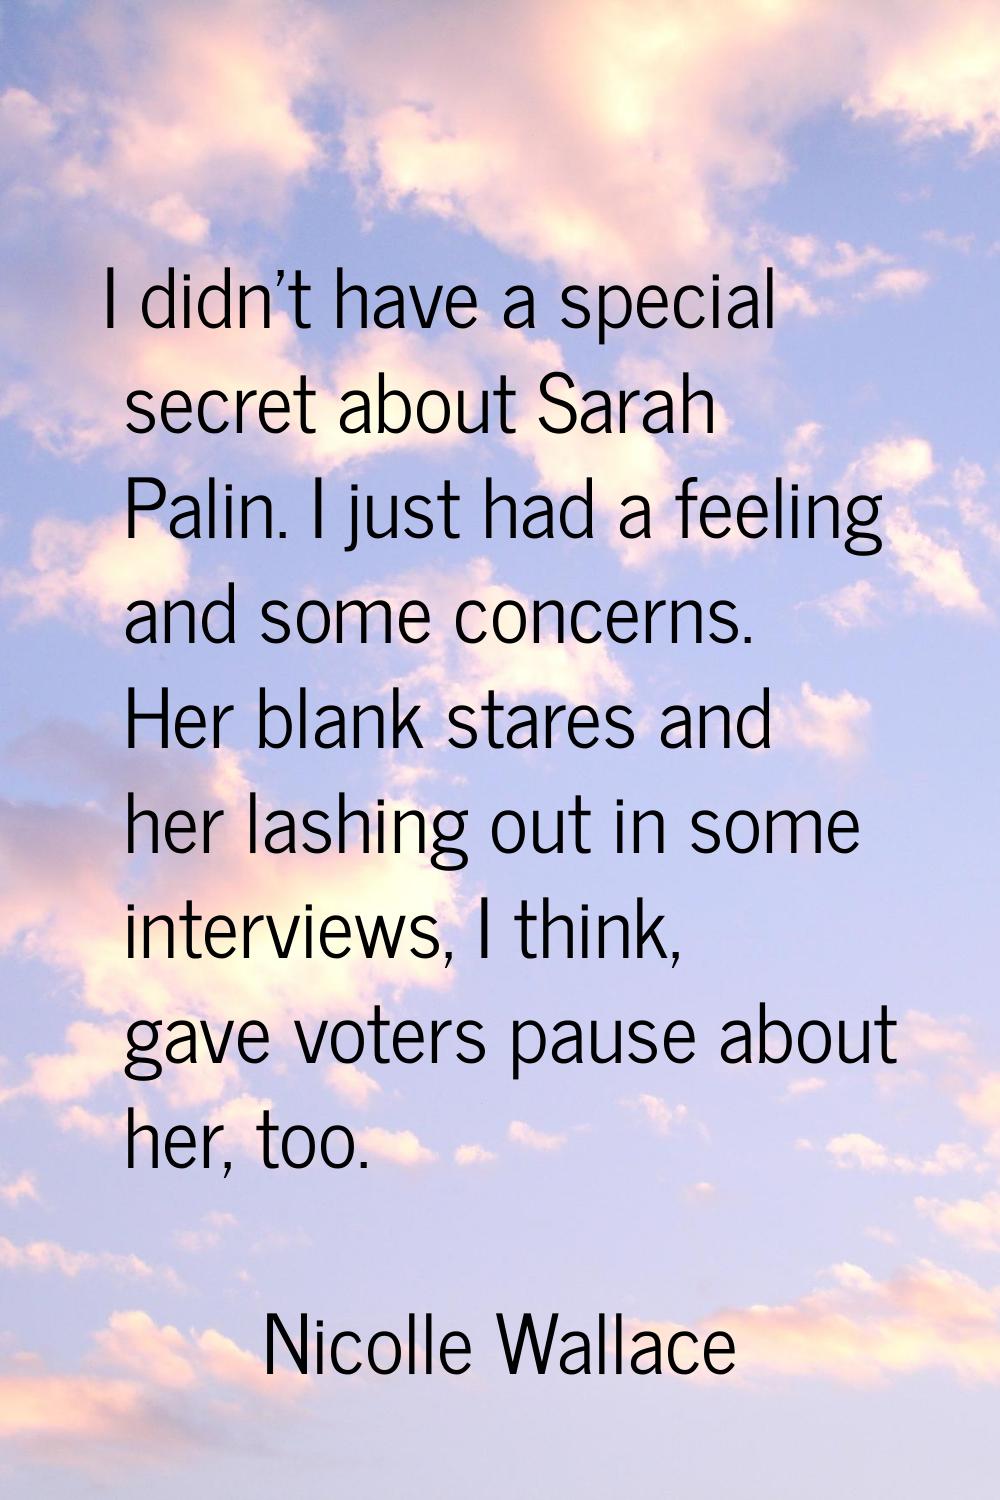 I didn't have a special secret about Sarah Palin. I just had a feeling and some concerns. Her blank